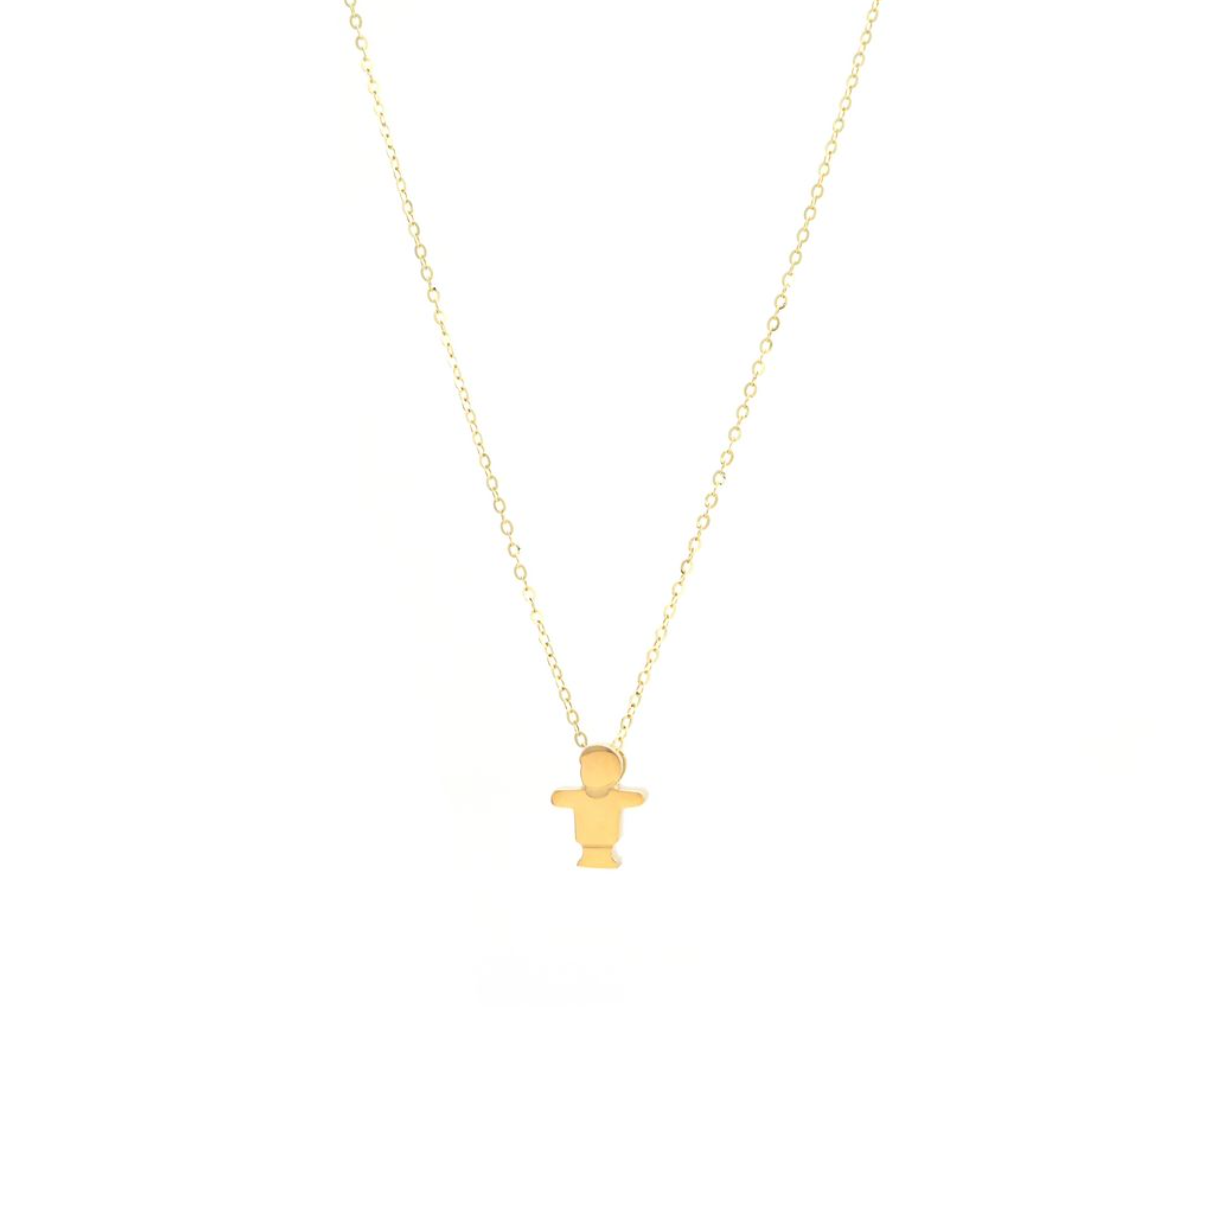 Boy Pendant With Chain 16+2" - 14k